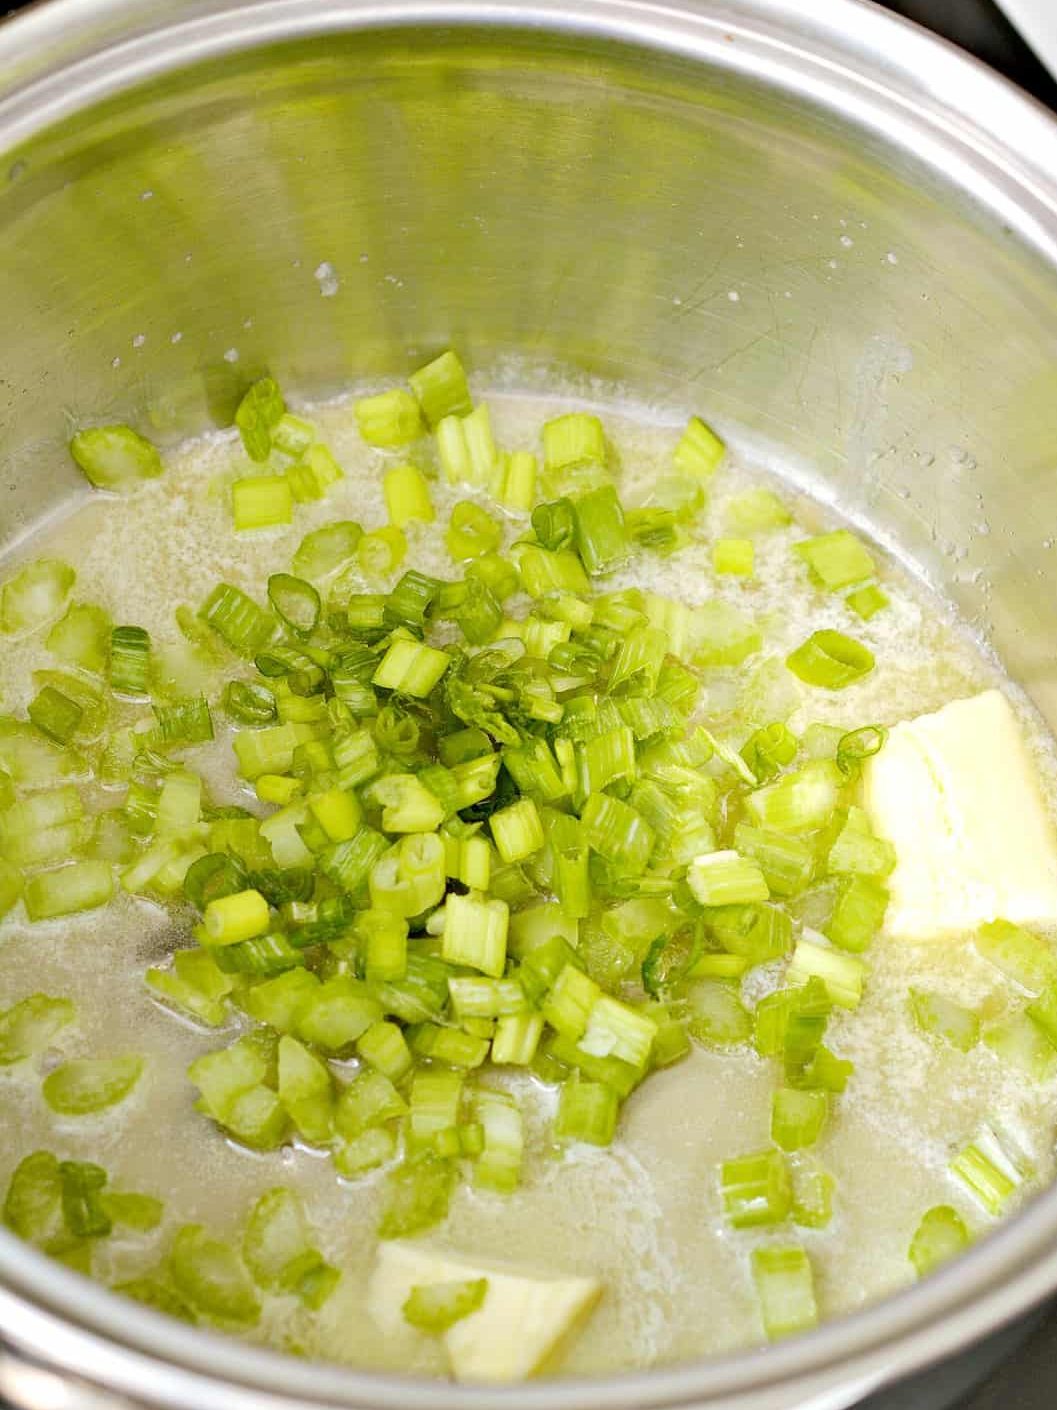 Add the celery and green onions to the saucepan, and saute until beginning to soften.